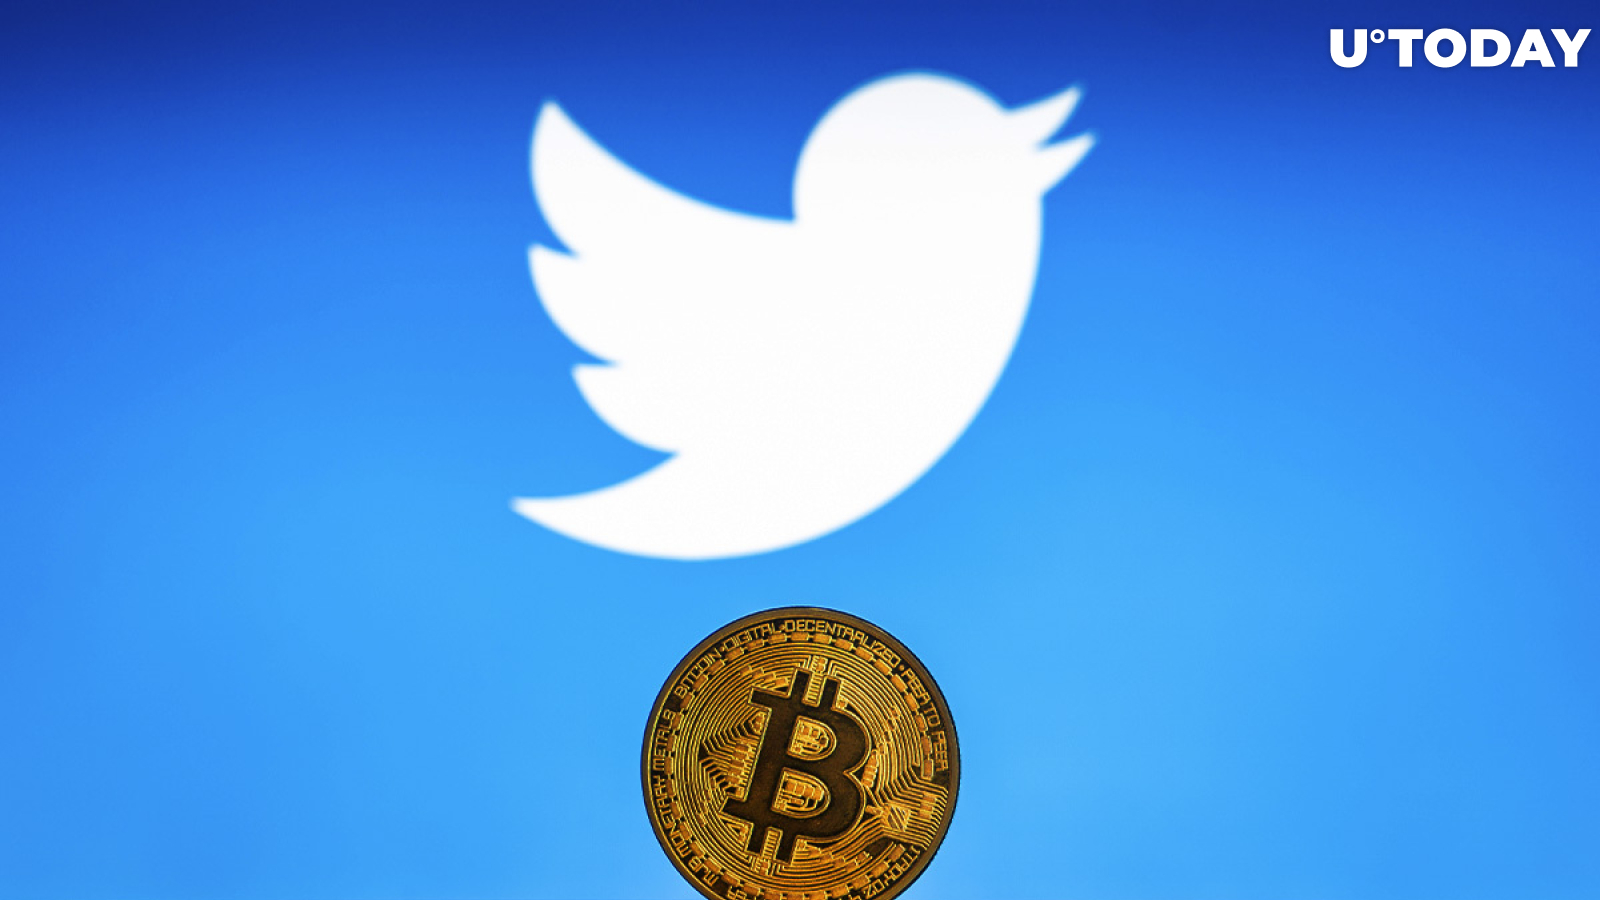 Negative Bitcoin Sentiment on Twitter Now May Lead to Price Upswing, Catching Crowd Off Guard: Santiment